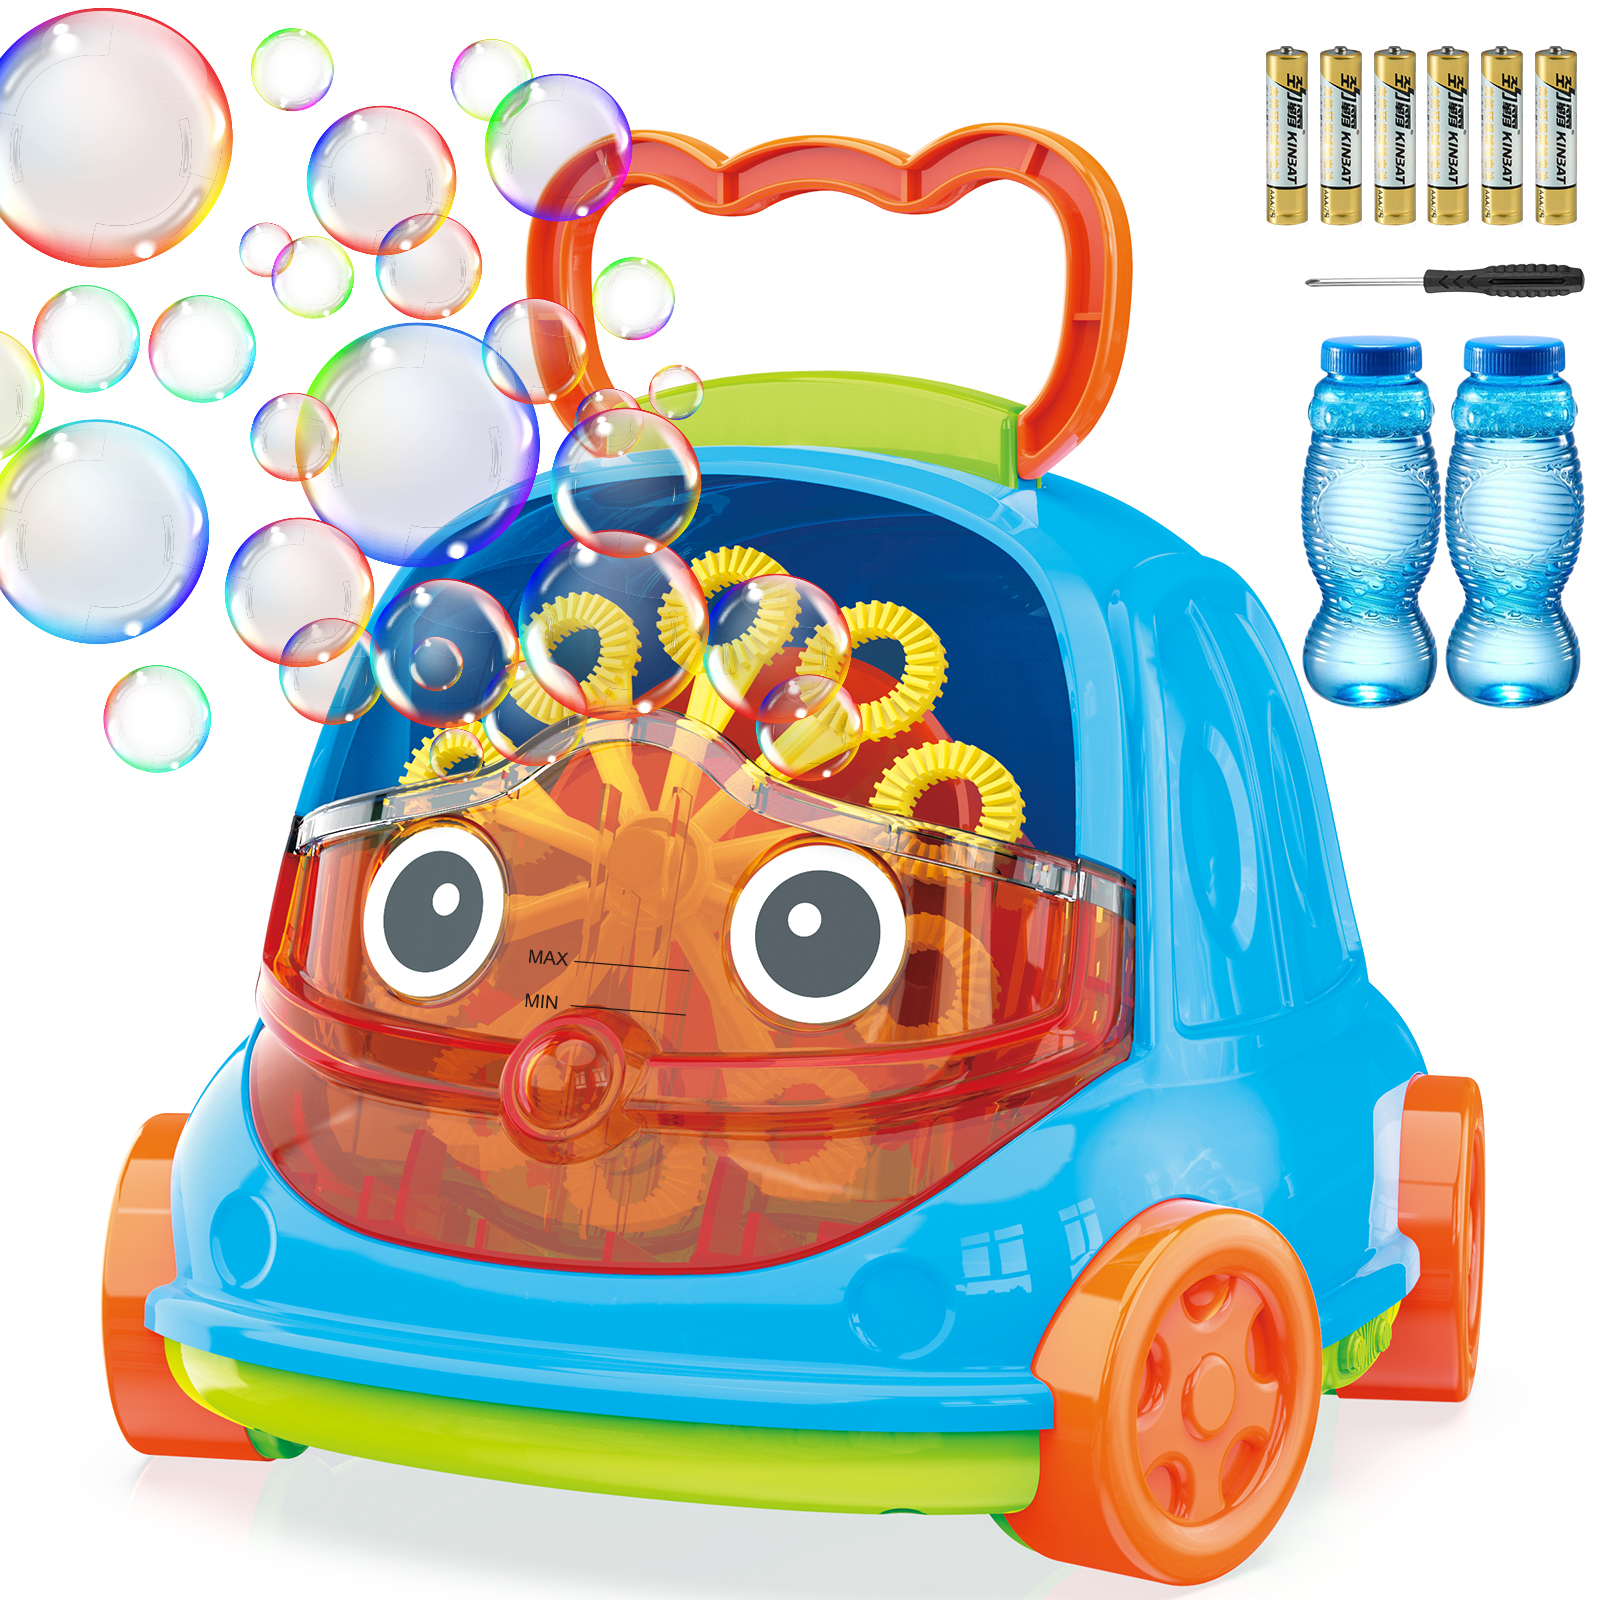 NBPOWER Bubble Machine for Toddler Kids, Automatic Bubble Blower Maker Outdoor Indoor Party with 3000+ Bubbles/min, Solution, Batteries